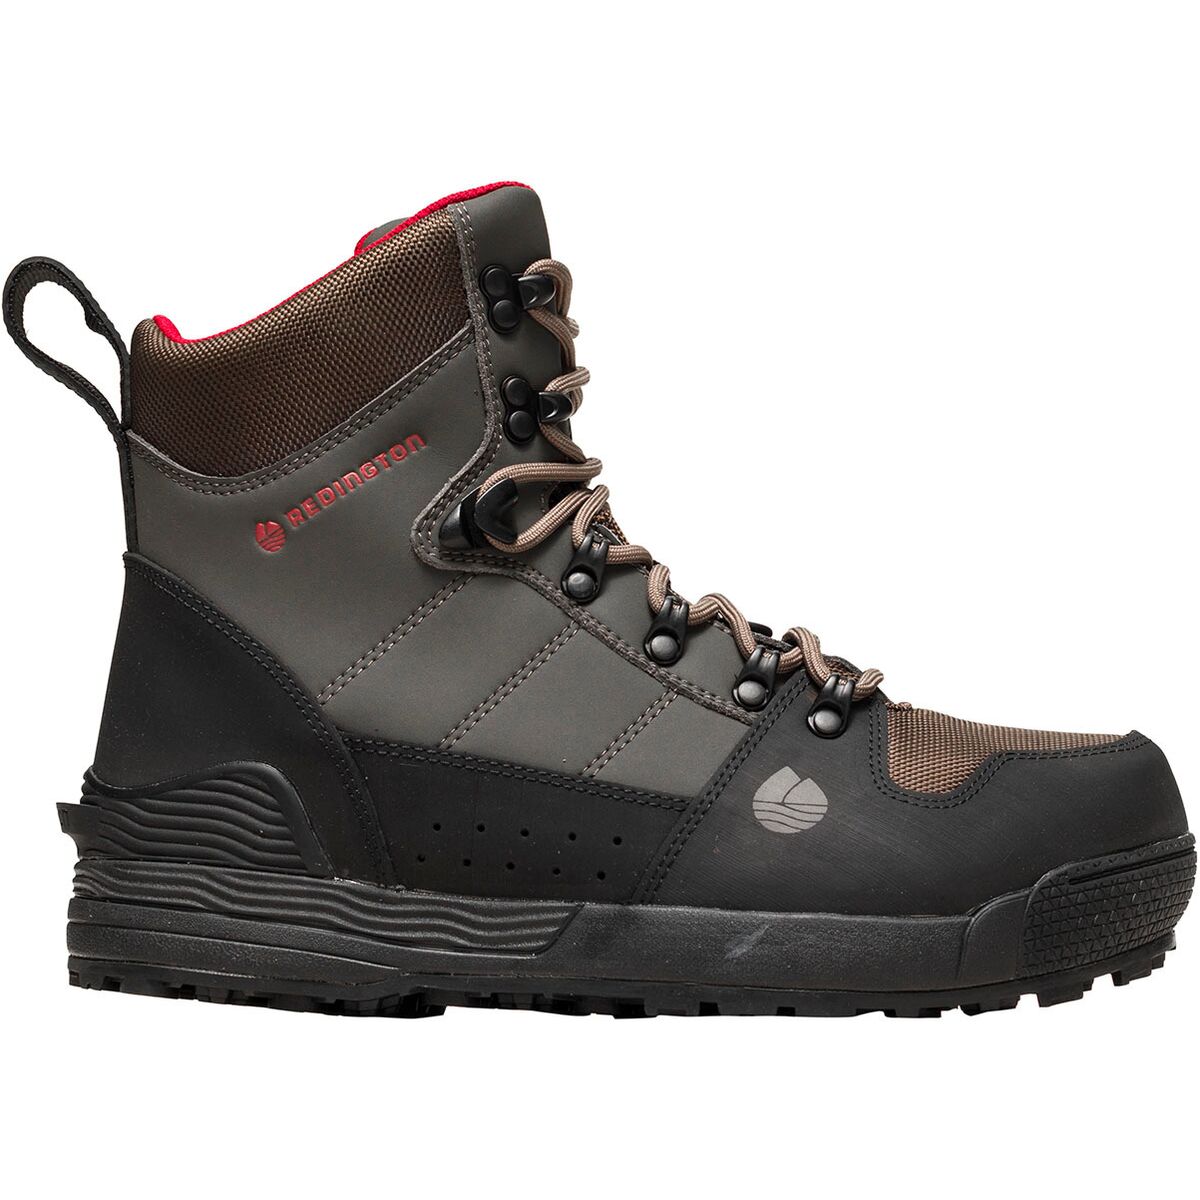 Redington Prowler Pro Sticky Rubber Wading Boot - Fly Fishing